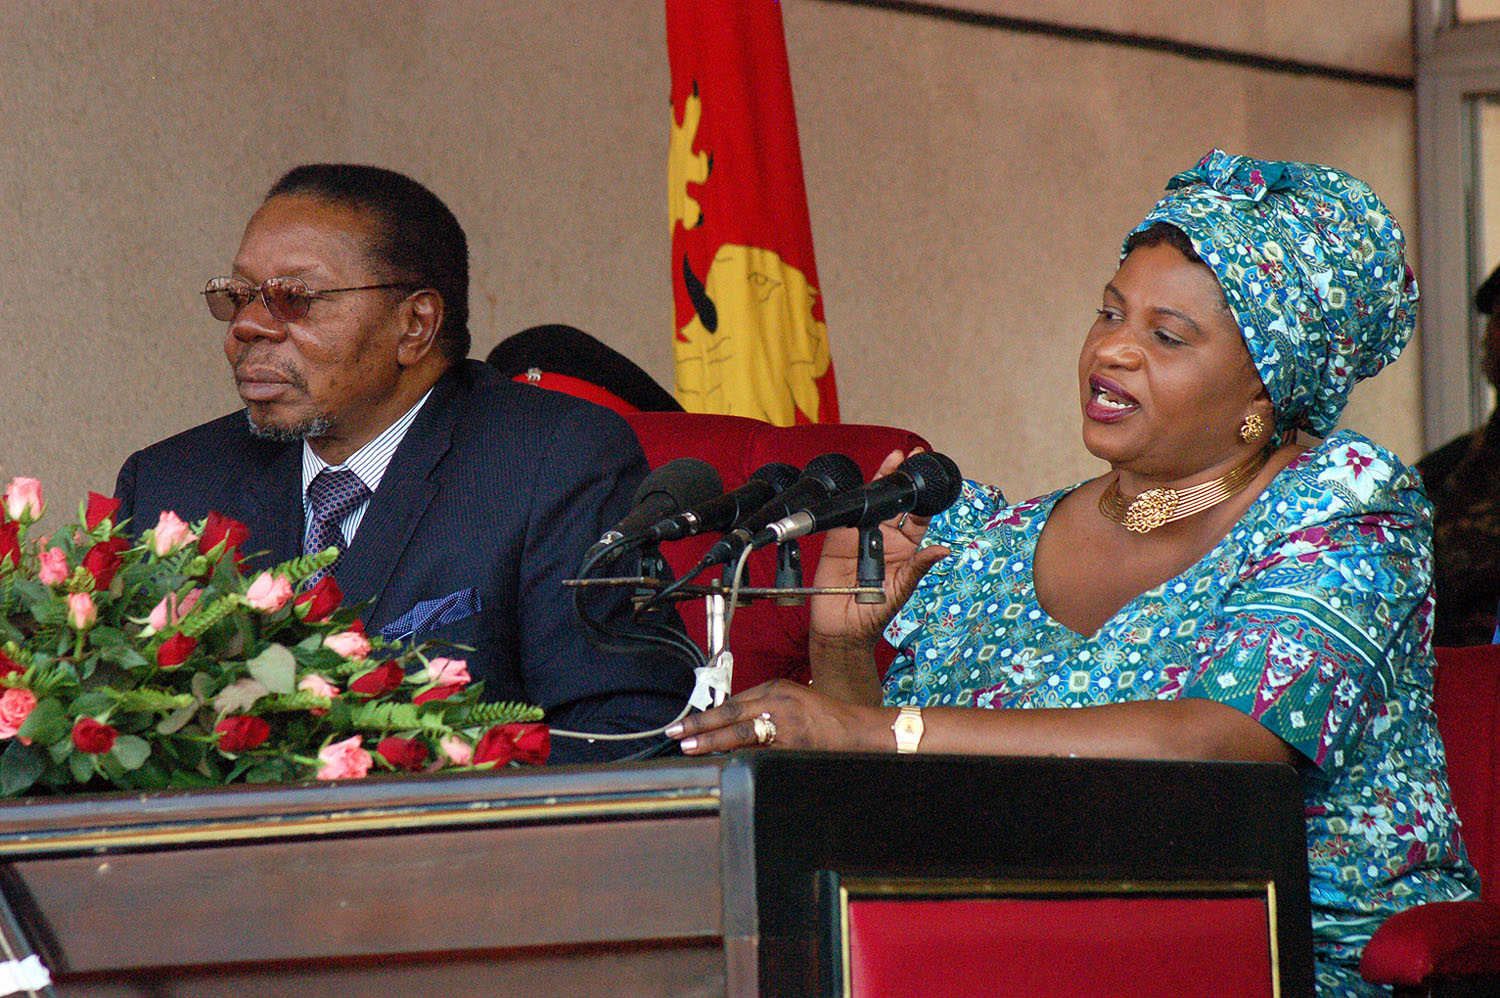 A man and a woman seated at a podium adorned with flowers; the woman is speaking into a microphone, both are dressed in formal attire.